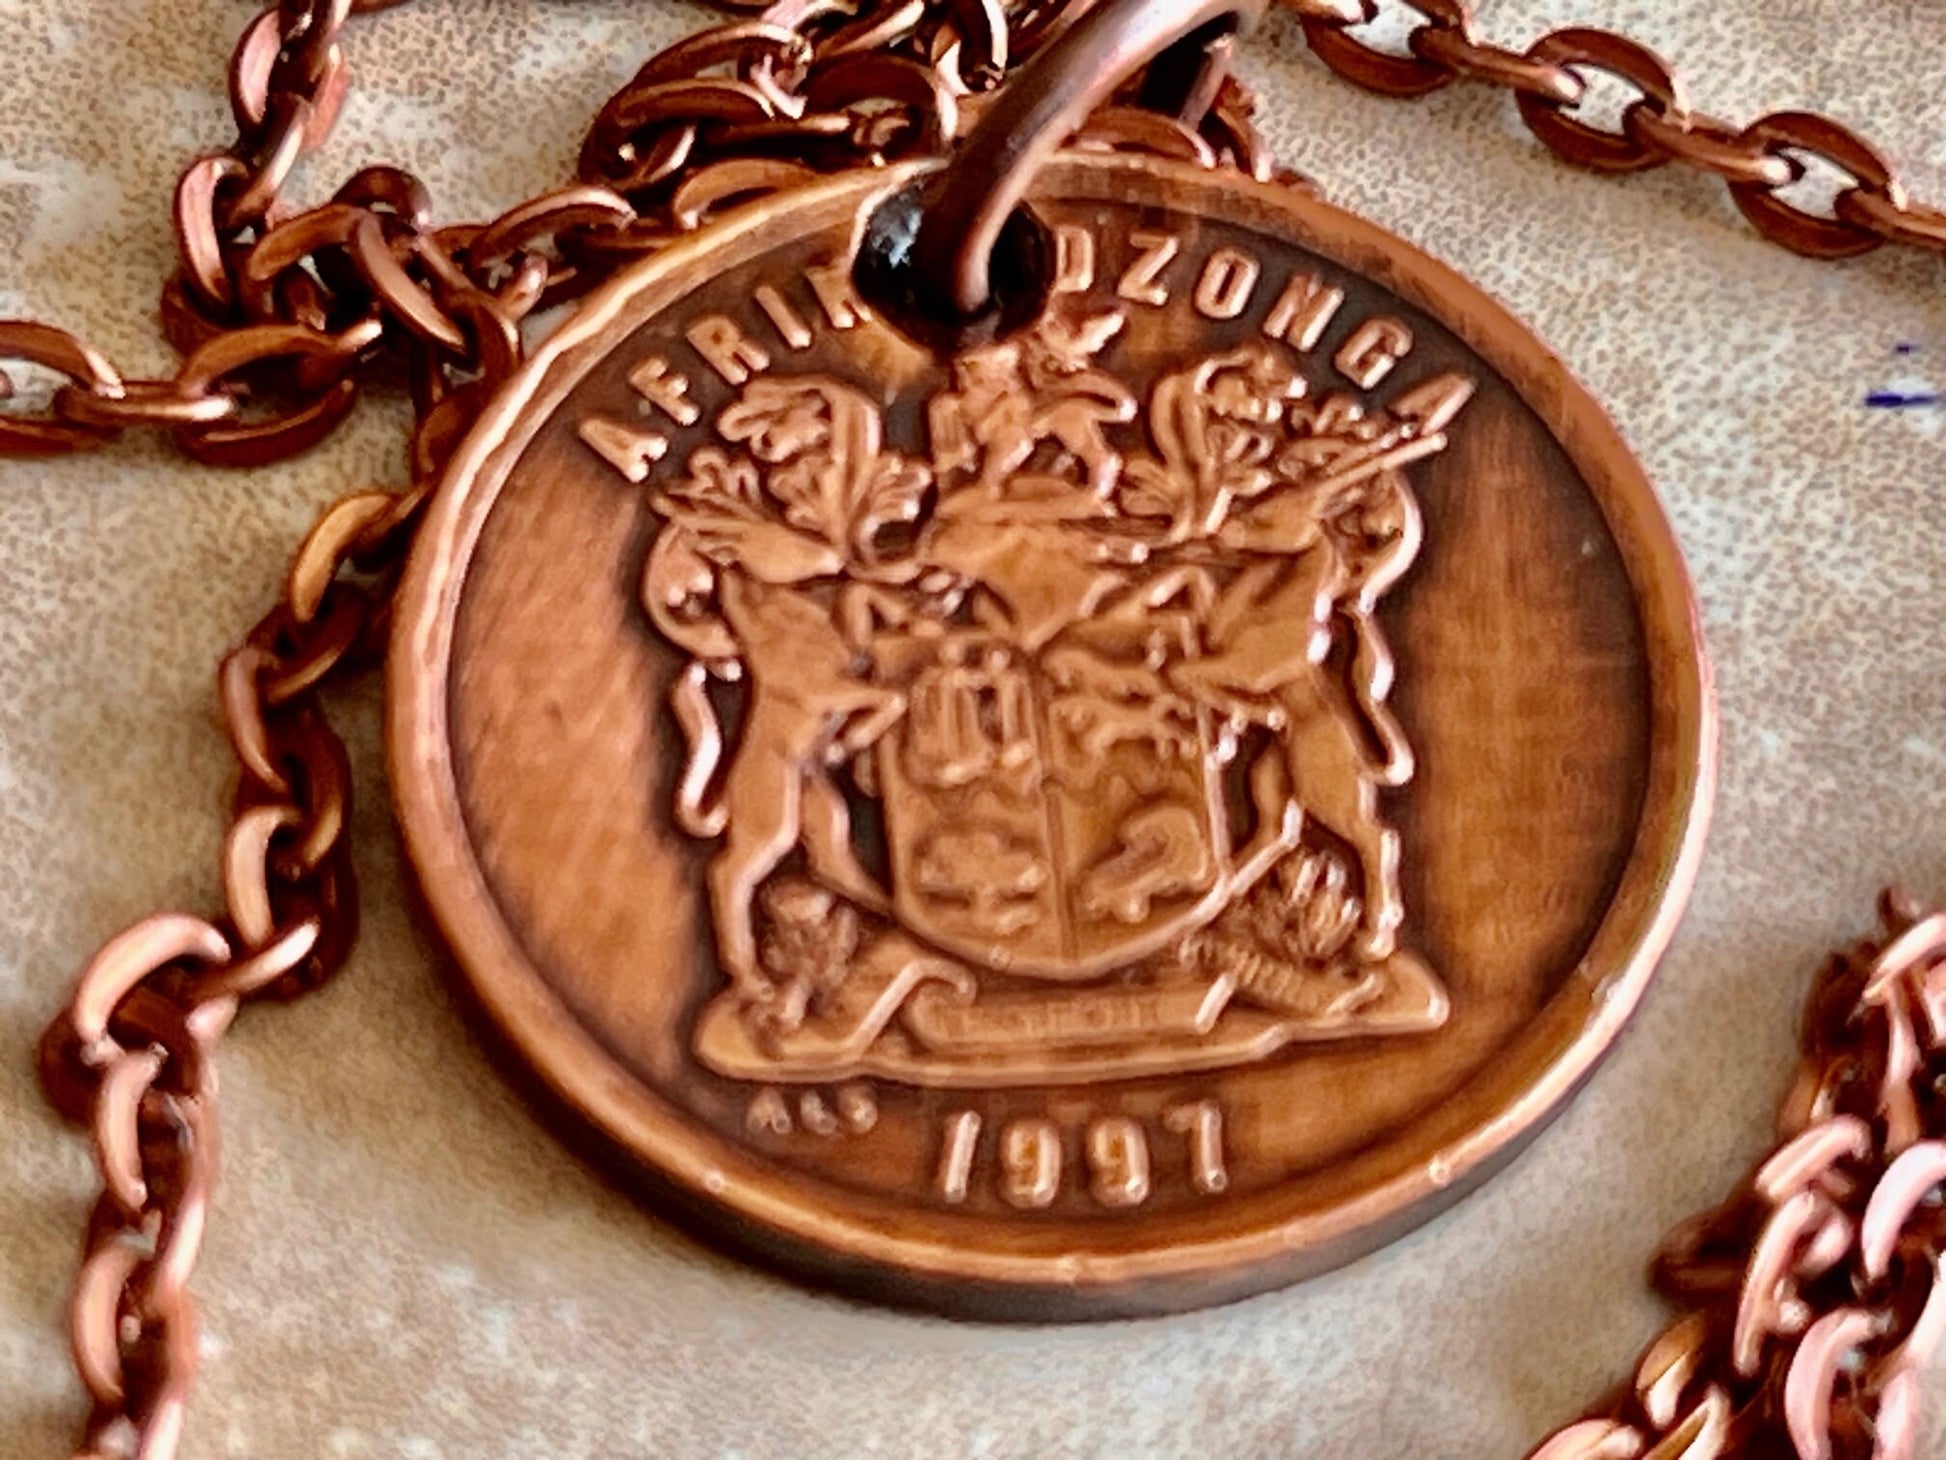 South Africa Coin Pendant Suid 5 Cents Personal Necklace Old Vintage Handmade Jewelry Gift Friend Charm For Him Her World Coin Collector